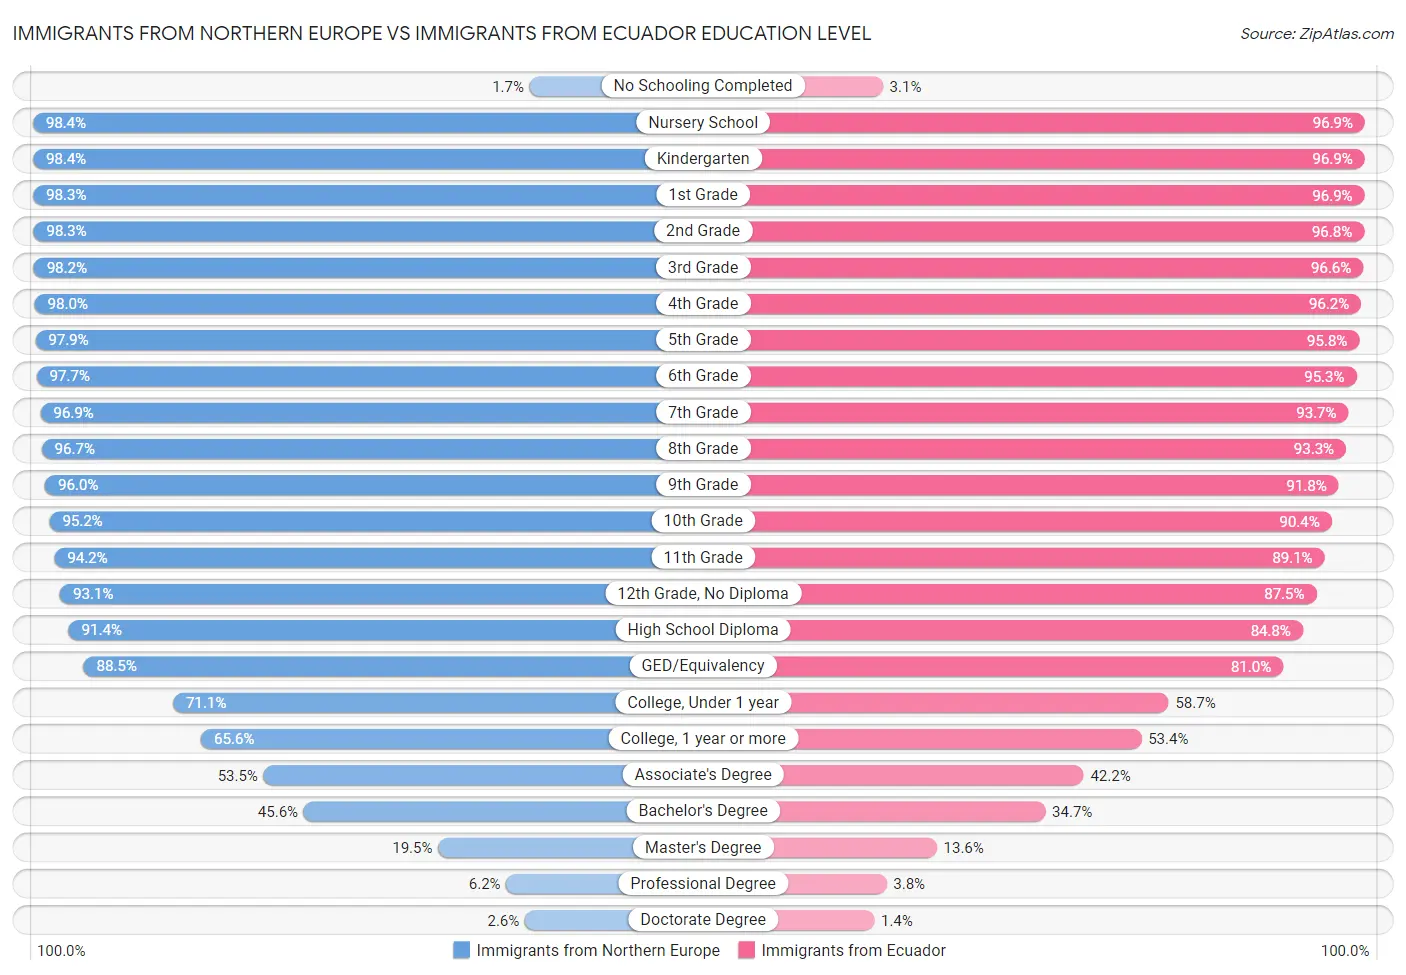 Immigrants from Northern Europe vs Immigrants from Ecuador Education Level